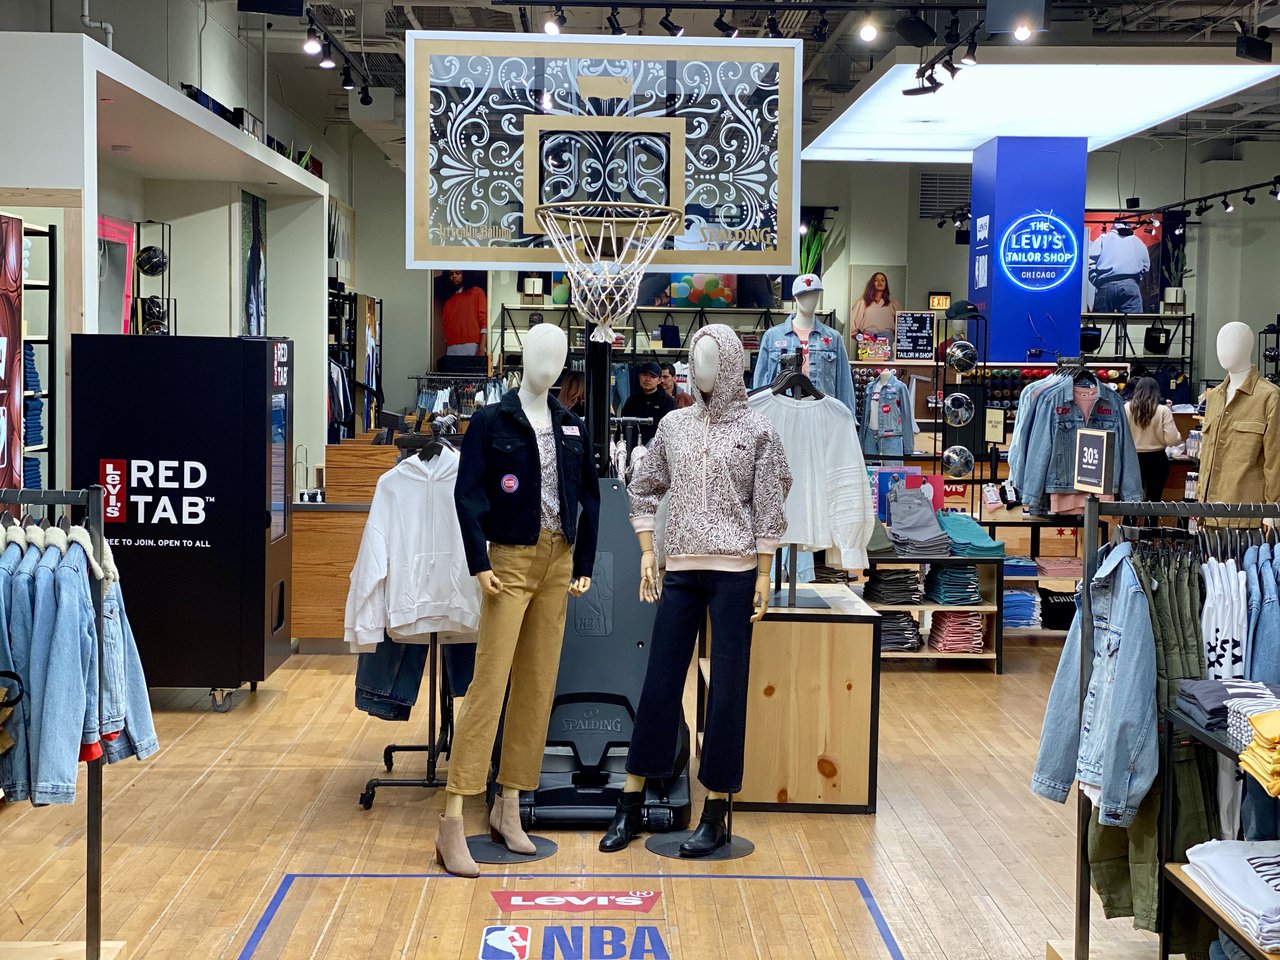 Levi's Store Activation - Experiential Activation in Chicago, IL | The  Vendry